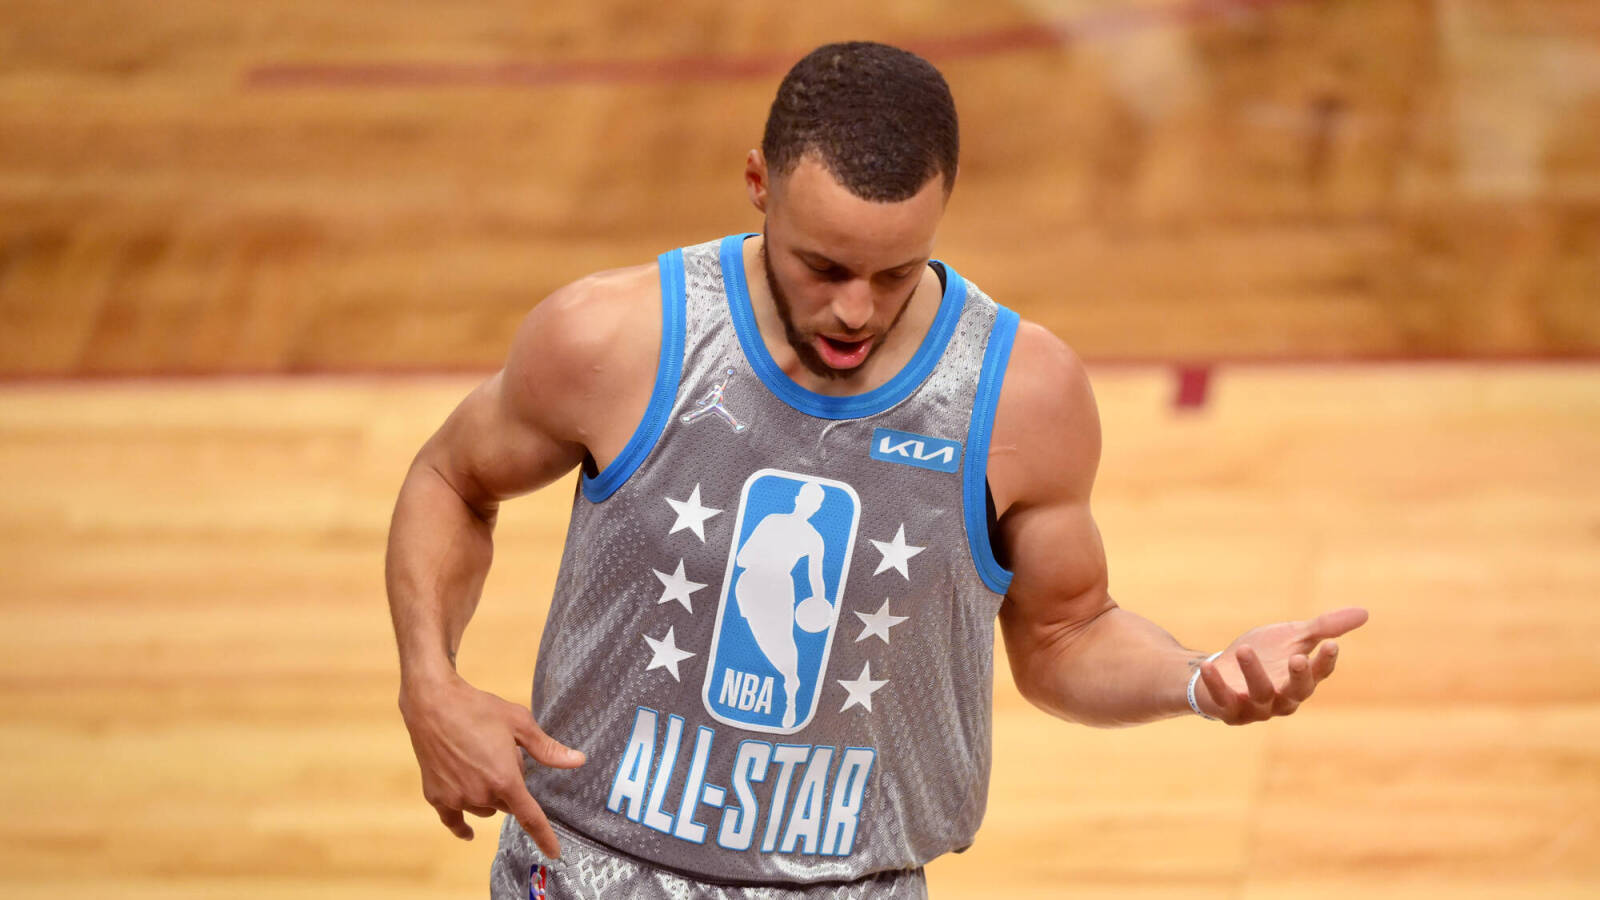 Stephen Curry All Star Wallpapers